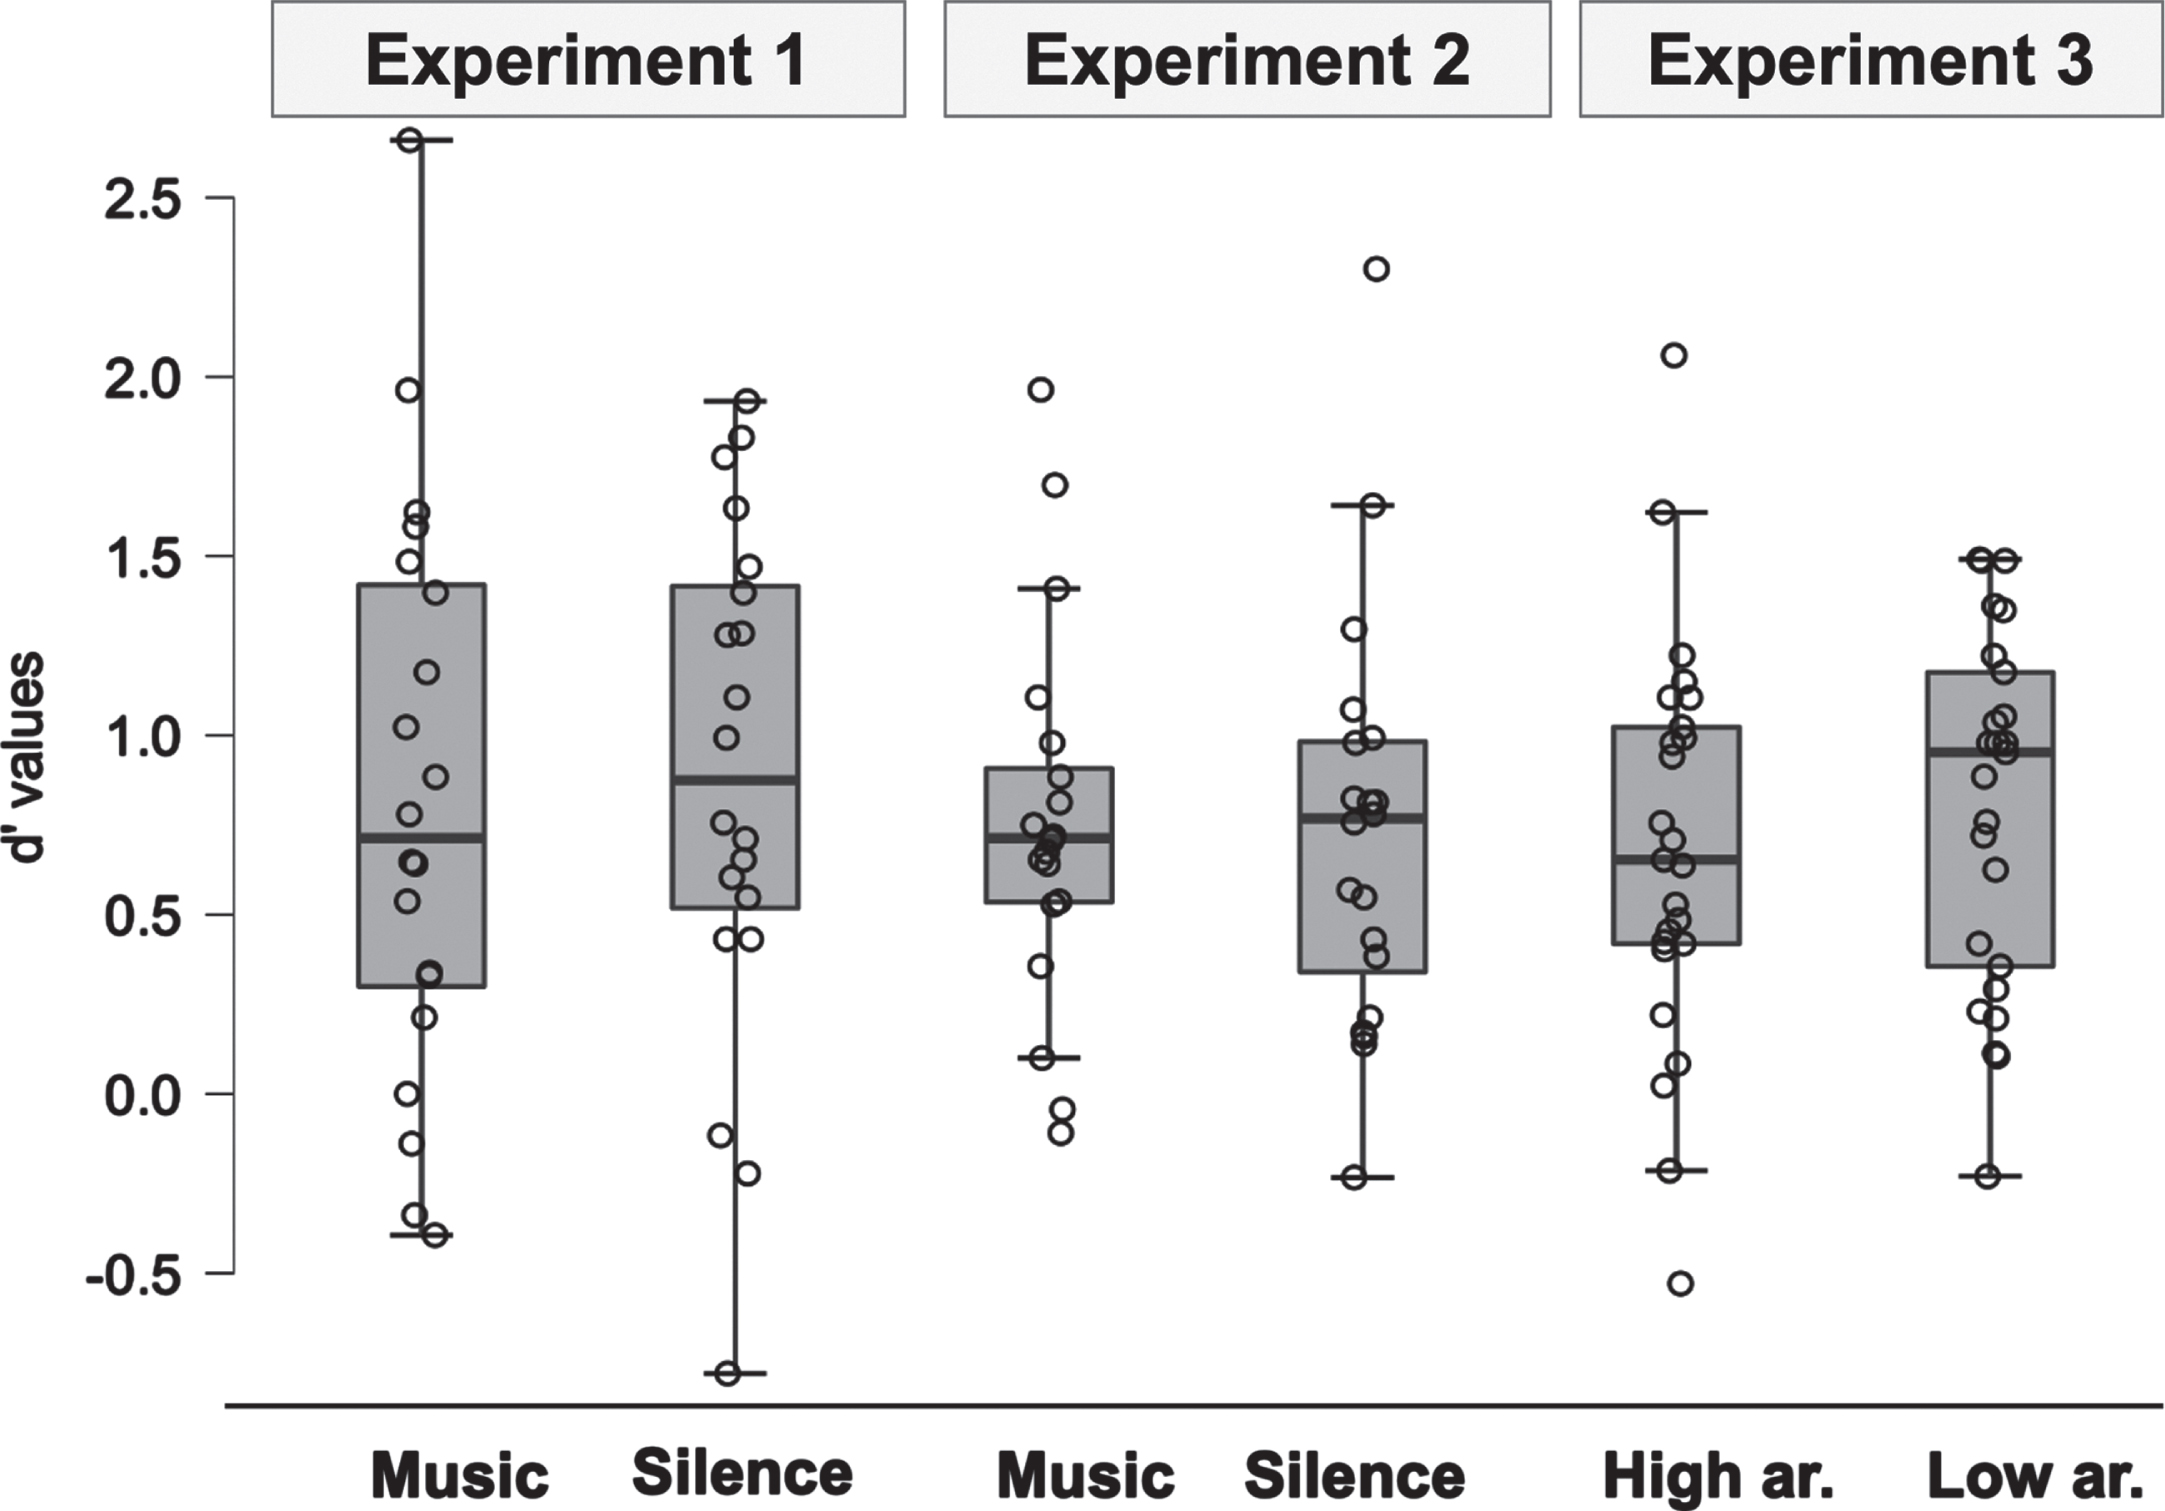 Memory performance (d’ values) for the three experiments separated by conditions (Experiments 1 and 2: Music versus Silence; Experiment 3: High-Arousal versus Low-Arousal Music).